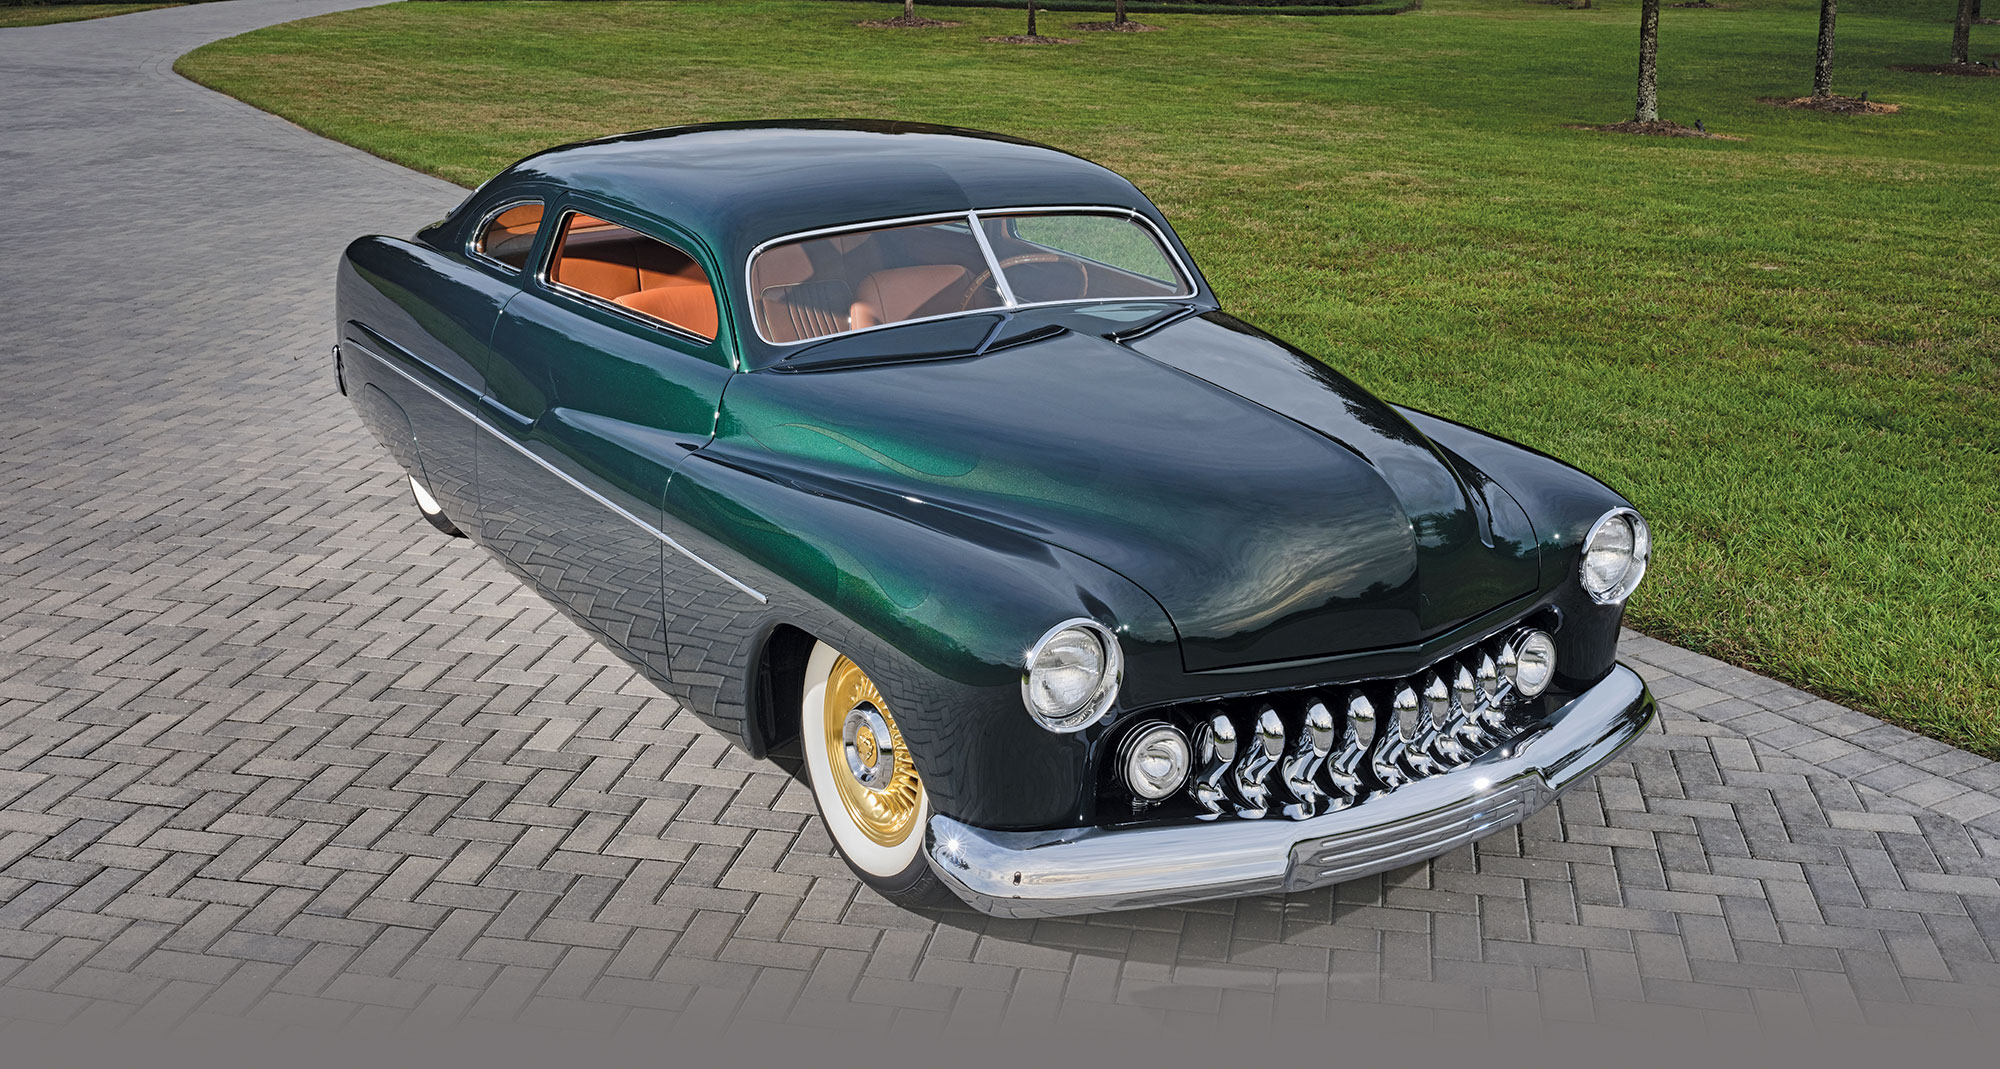 ’51 Merc front view of grill